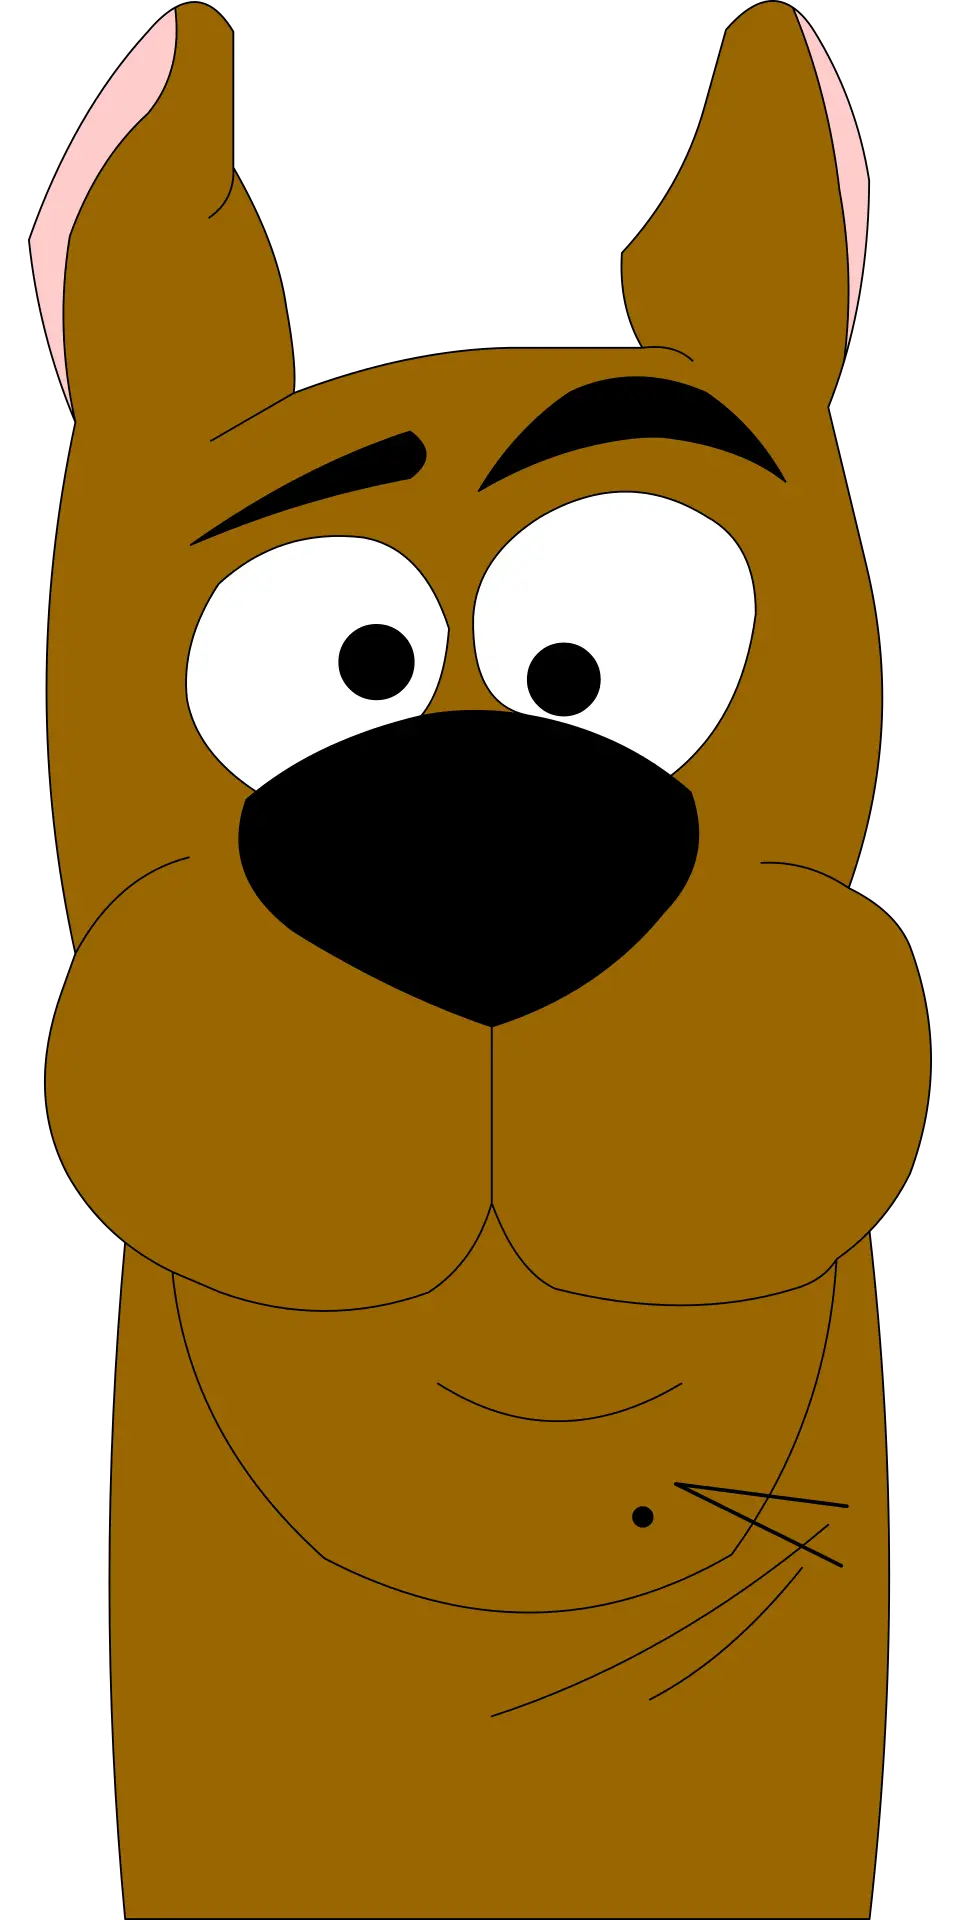 Scooby Doo Dog Png Image Scooby Doo Clipart Scooby Doo Png